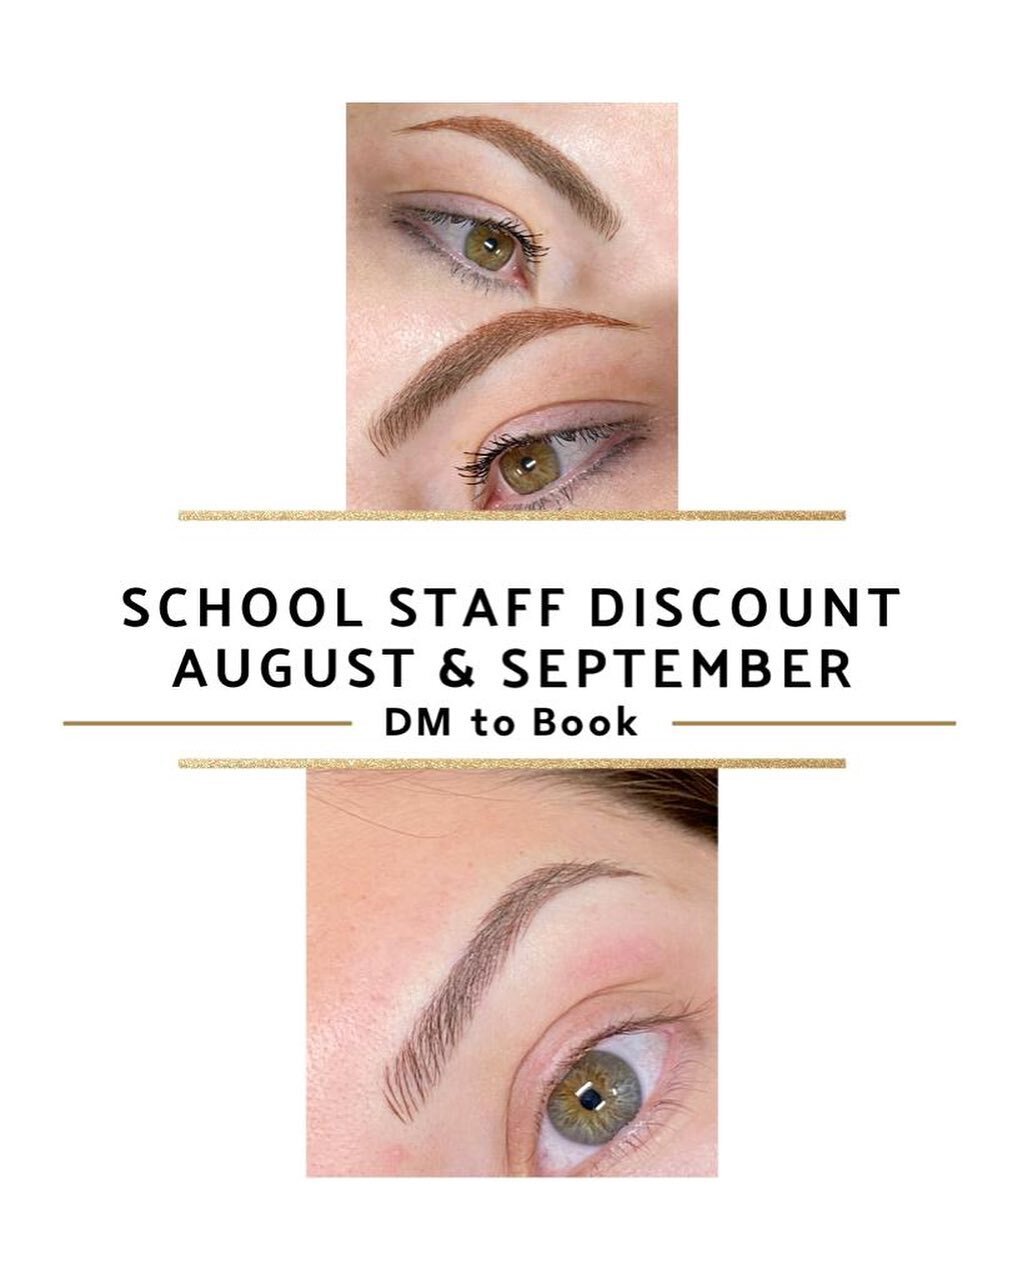 We appreciate all the hardworking school staff! 🧑&zwj;🏫📚🚌 And as a new school year begins, we want to THANK YOU by treating you to a special discount $$$ for the months of August &amp; September 🎁 
See below for details ⬇️. 

*Must show school I